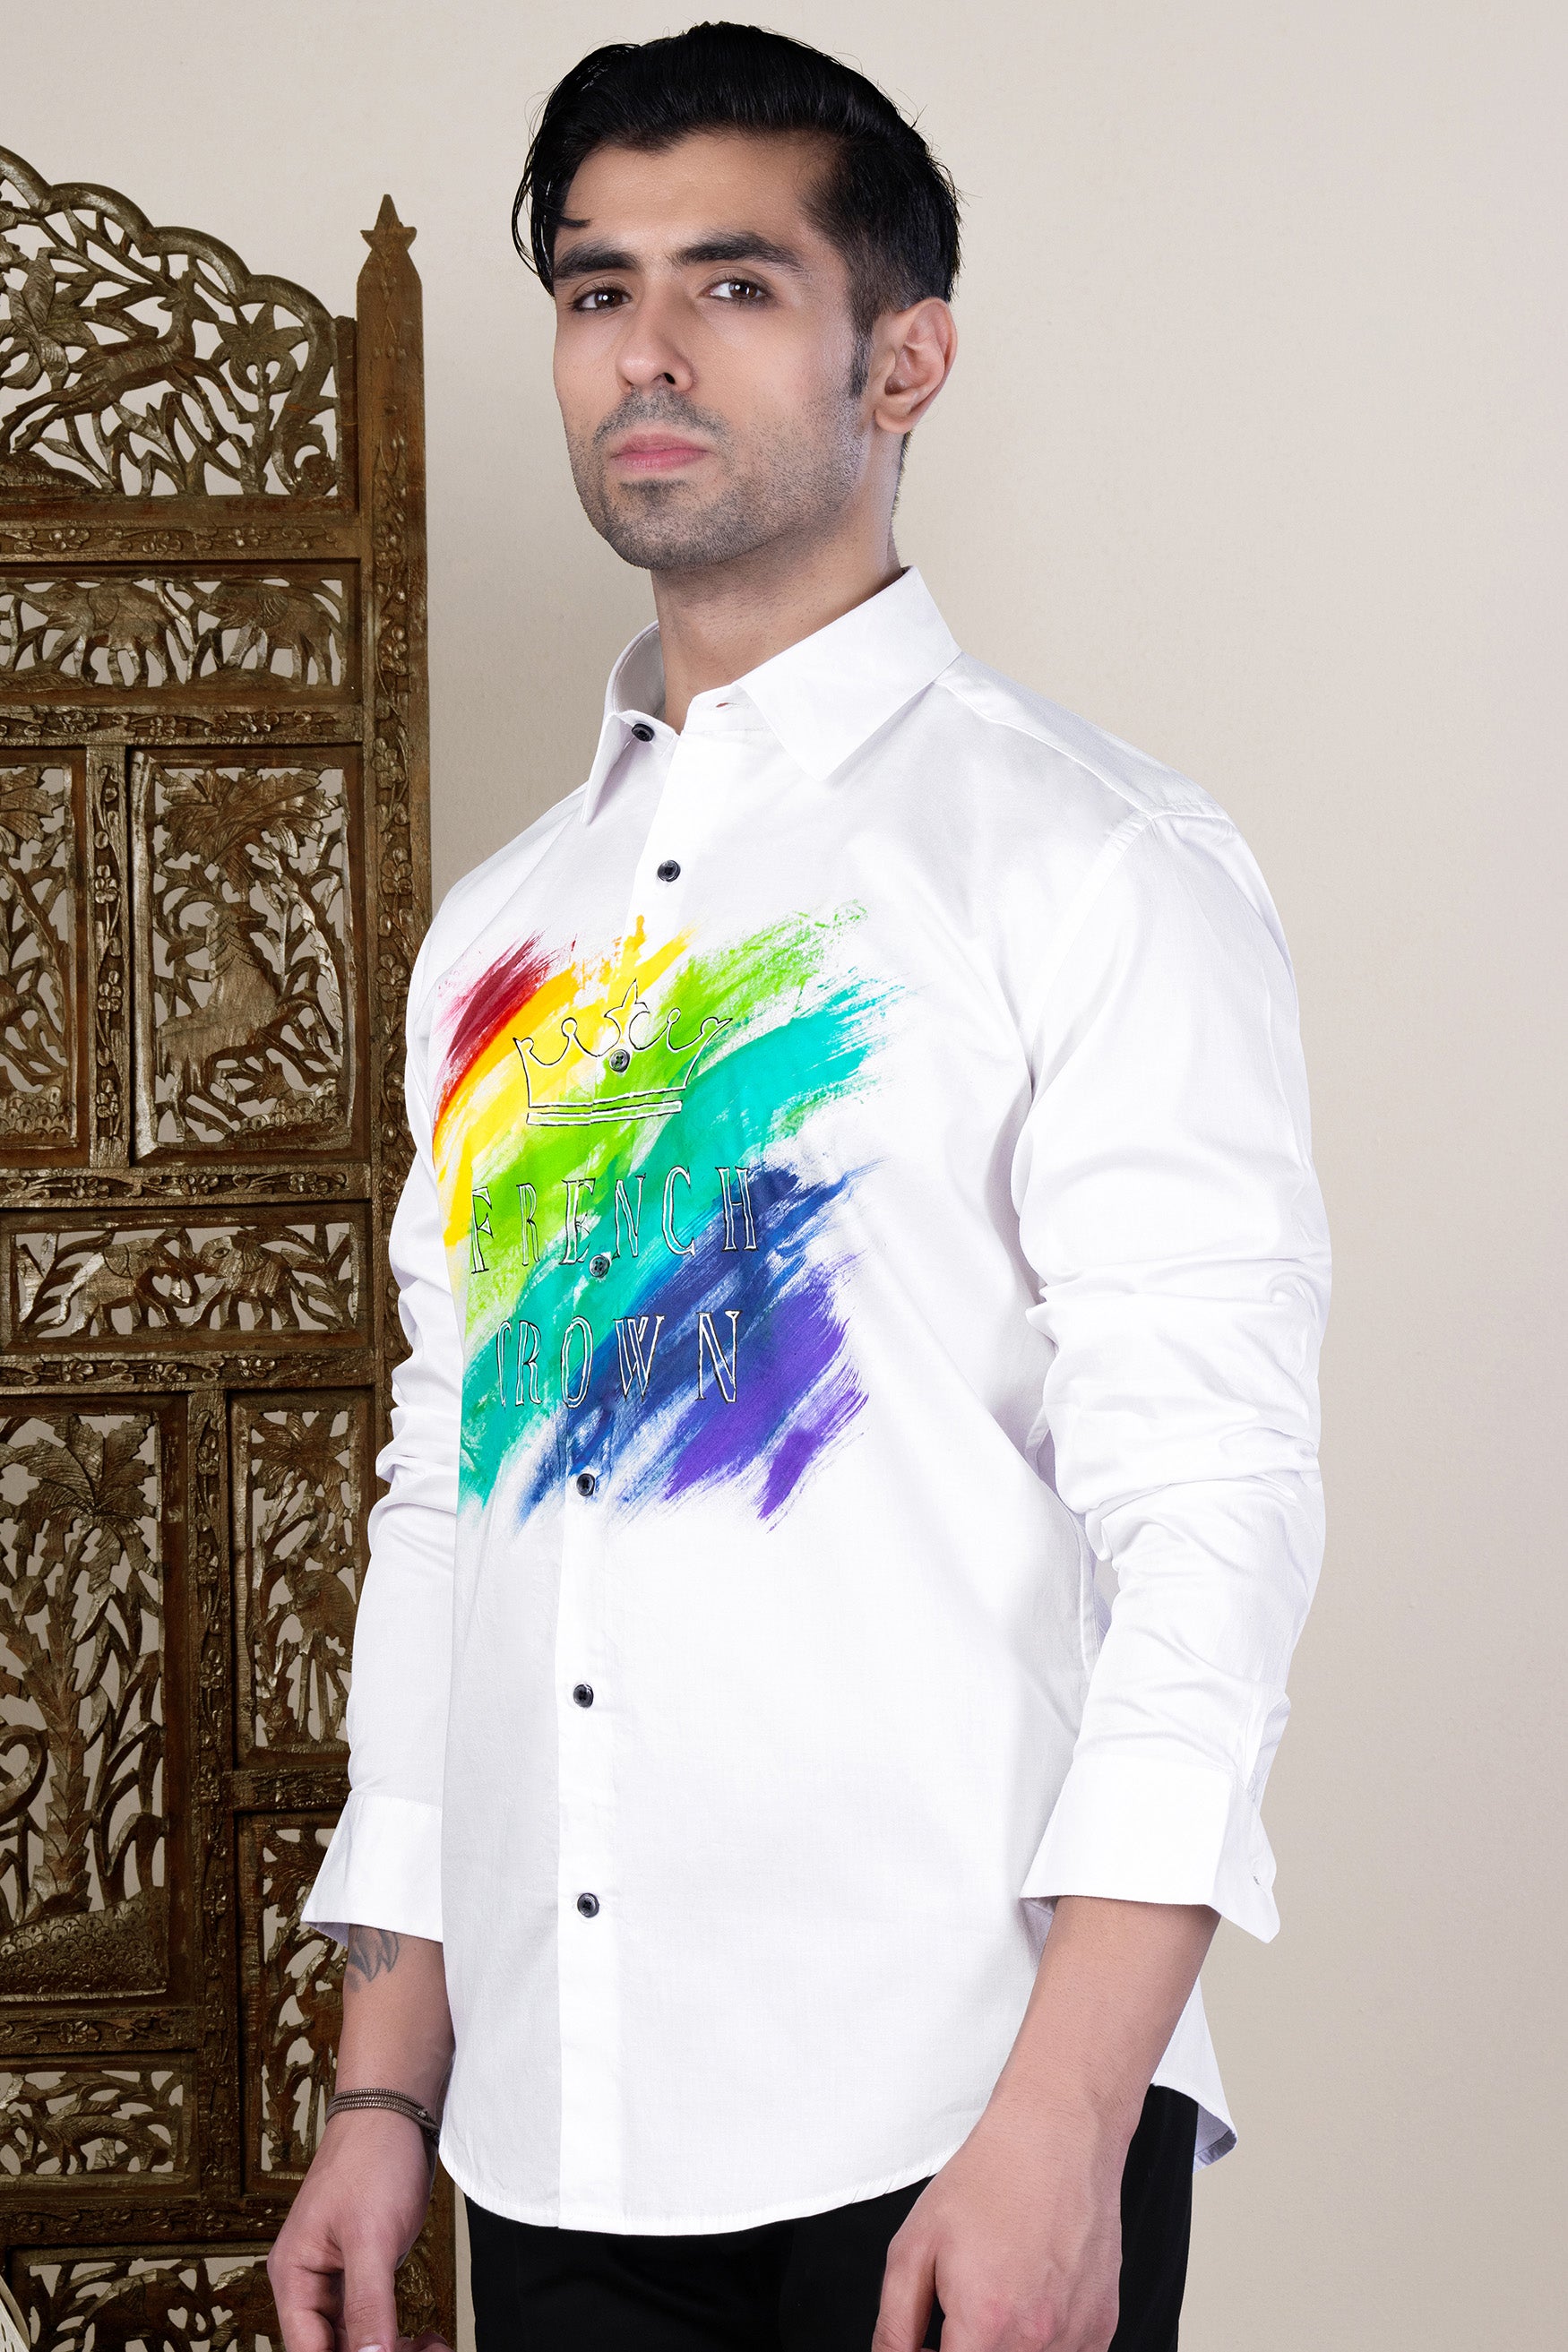 Bright White Multicolour with French Crown Hand Painted Subtle Sheen Super Soft Premium Cotton Designer Shirt 12166-NP-BLK-ART-38, 12166-NP-BLK-ART-H-38, 12166-NP-BLK-ART-39, 12166-NP-BLK-ART-H-39, 12166-NP-BLK-ART-40, 12166-NP-BLK-ART-H-40, 12166-NP-BLK-ART-42, 12166-NP-BLK-ART-H-42, 12166-NP-BLK-ART-44, 12166-NP-BLK-ART-H-44, 12166-NP-BLK-ART-46, 12166-NP-BLK-ART-H-46, 12166-NP-BLK-ART-48, 12166-NP-BLK-ART-H-48, 12166-NP-BLK-ART-50, 12166-NP-BLK-ART-H-50, 12166-NP-BLK-ART-52, 12166-NP-BLK-ART-H-52